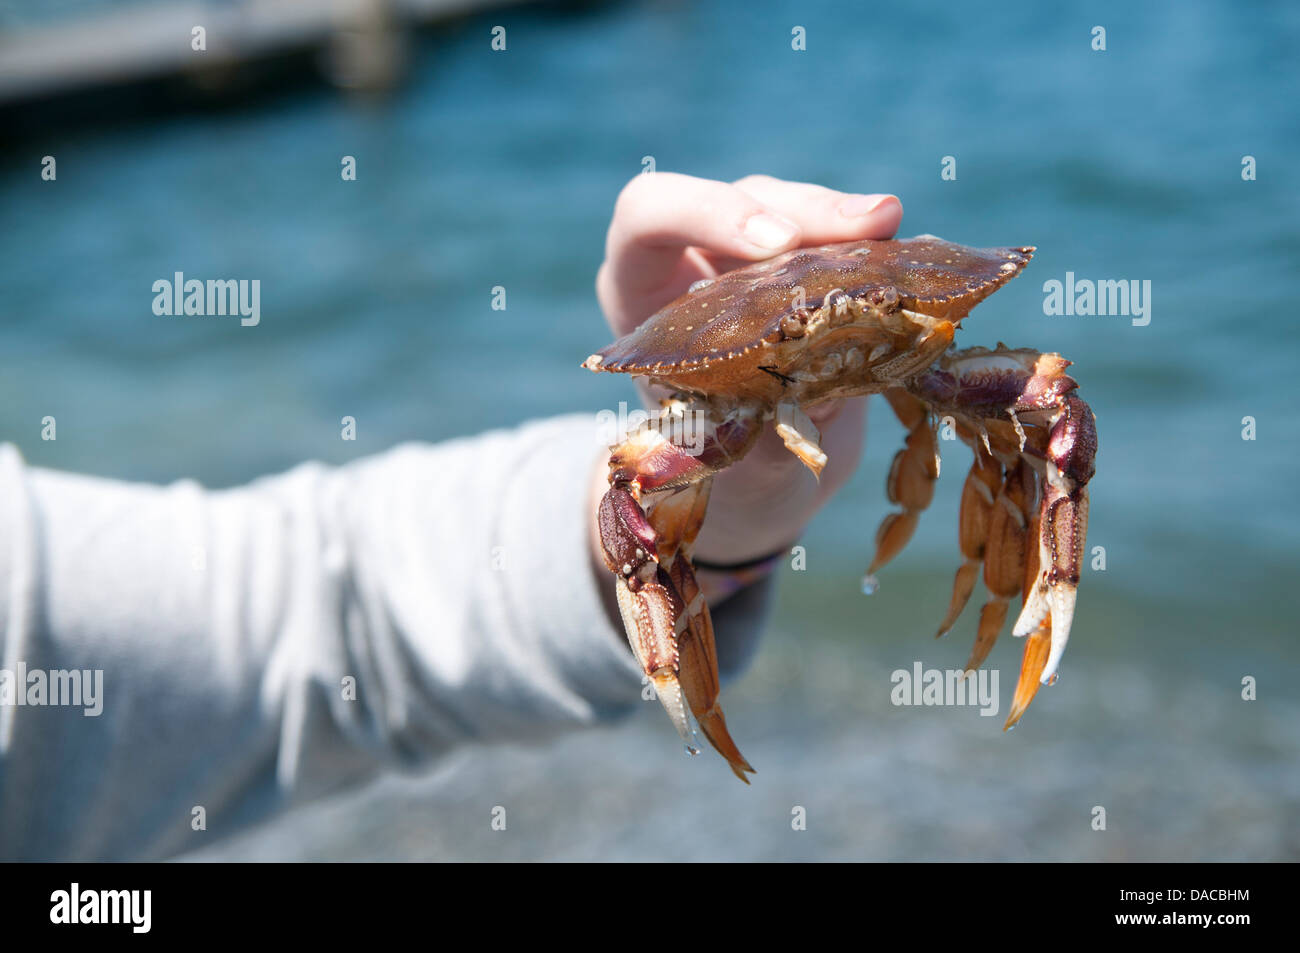 Hand holding a crab on the beach. Stock Photo